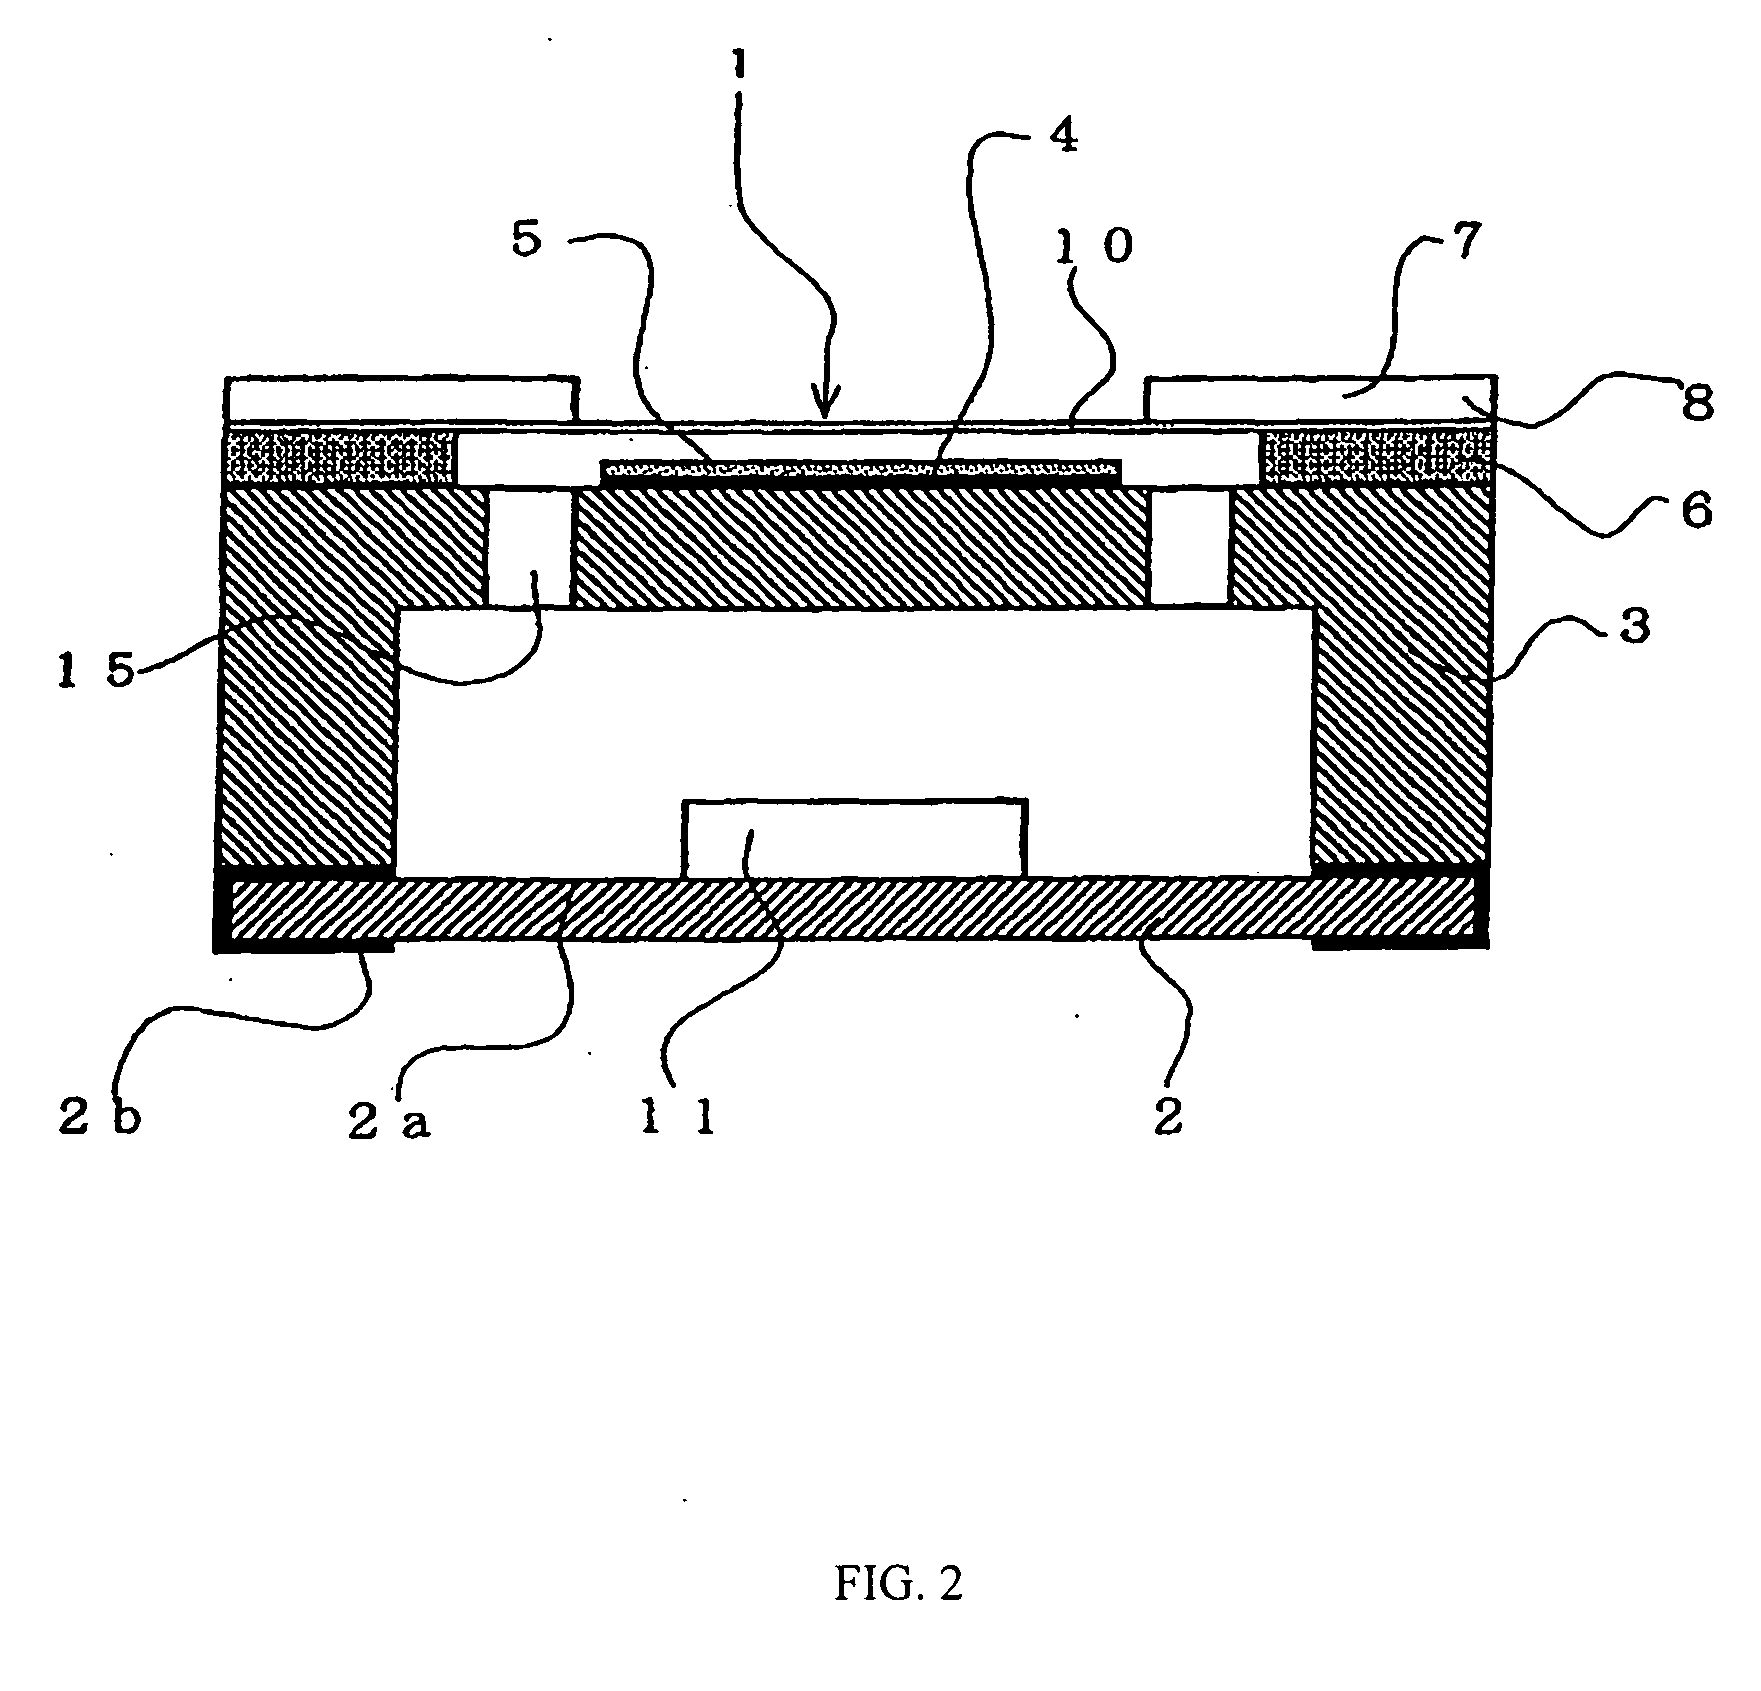 Method of producing heat-resistant electrically charged resin material, electret condenser microphone using the heat-resistant electrically charged resin material, and method of producing the same